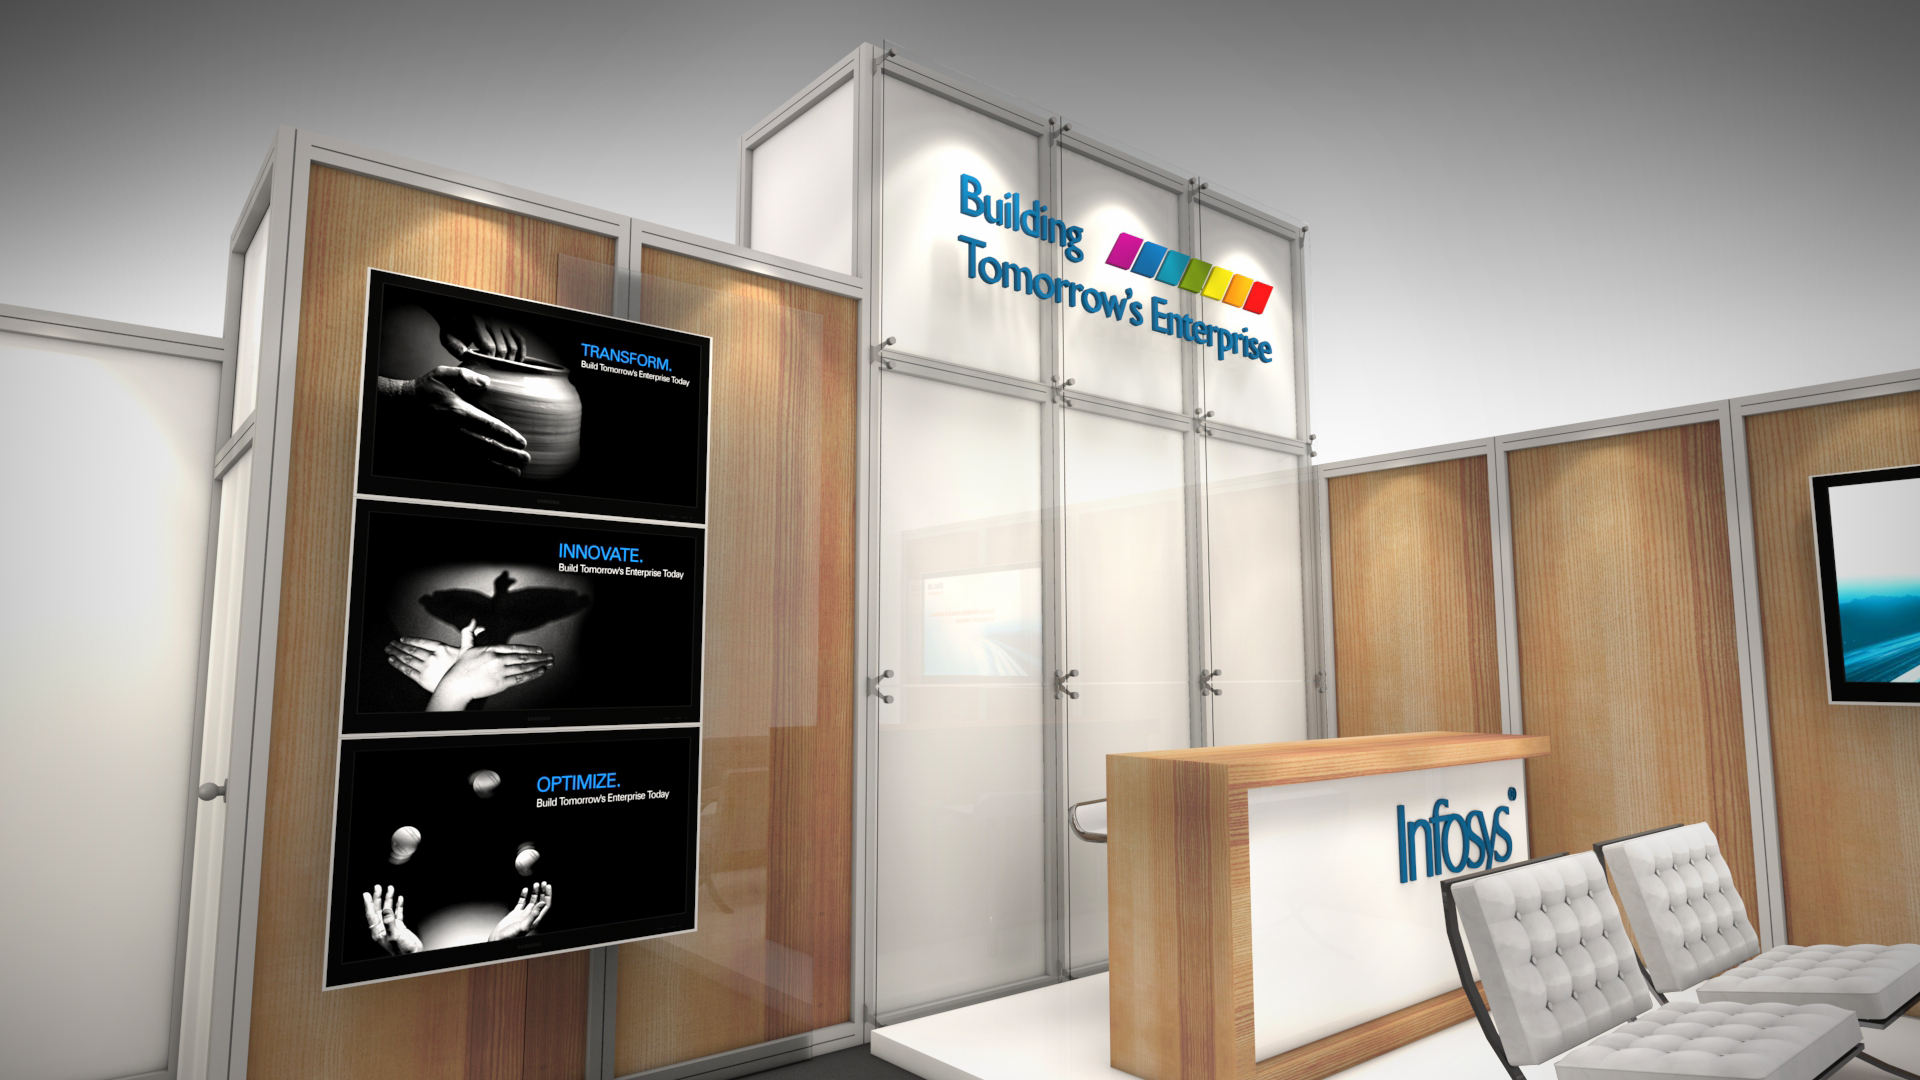 Infosys rental exhibit with a reception, meeting rooms and demo stations